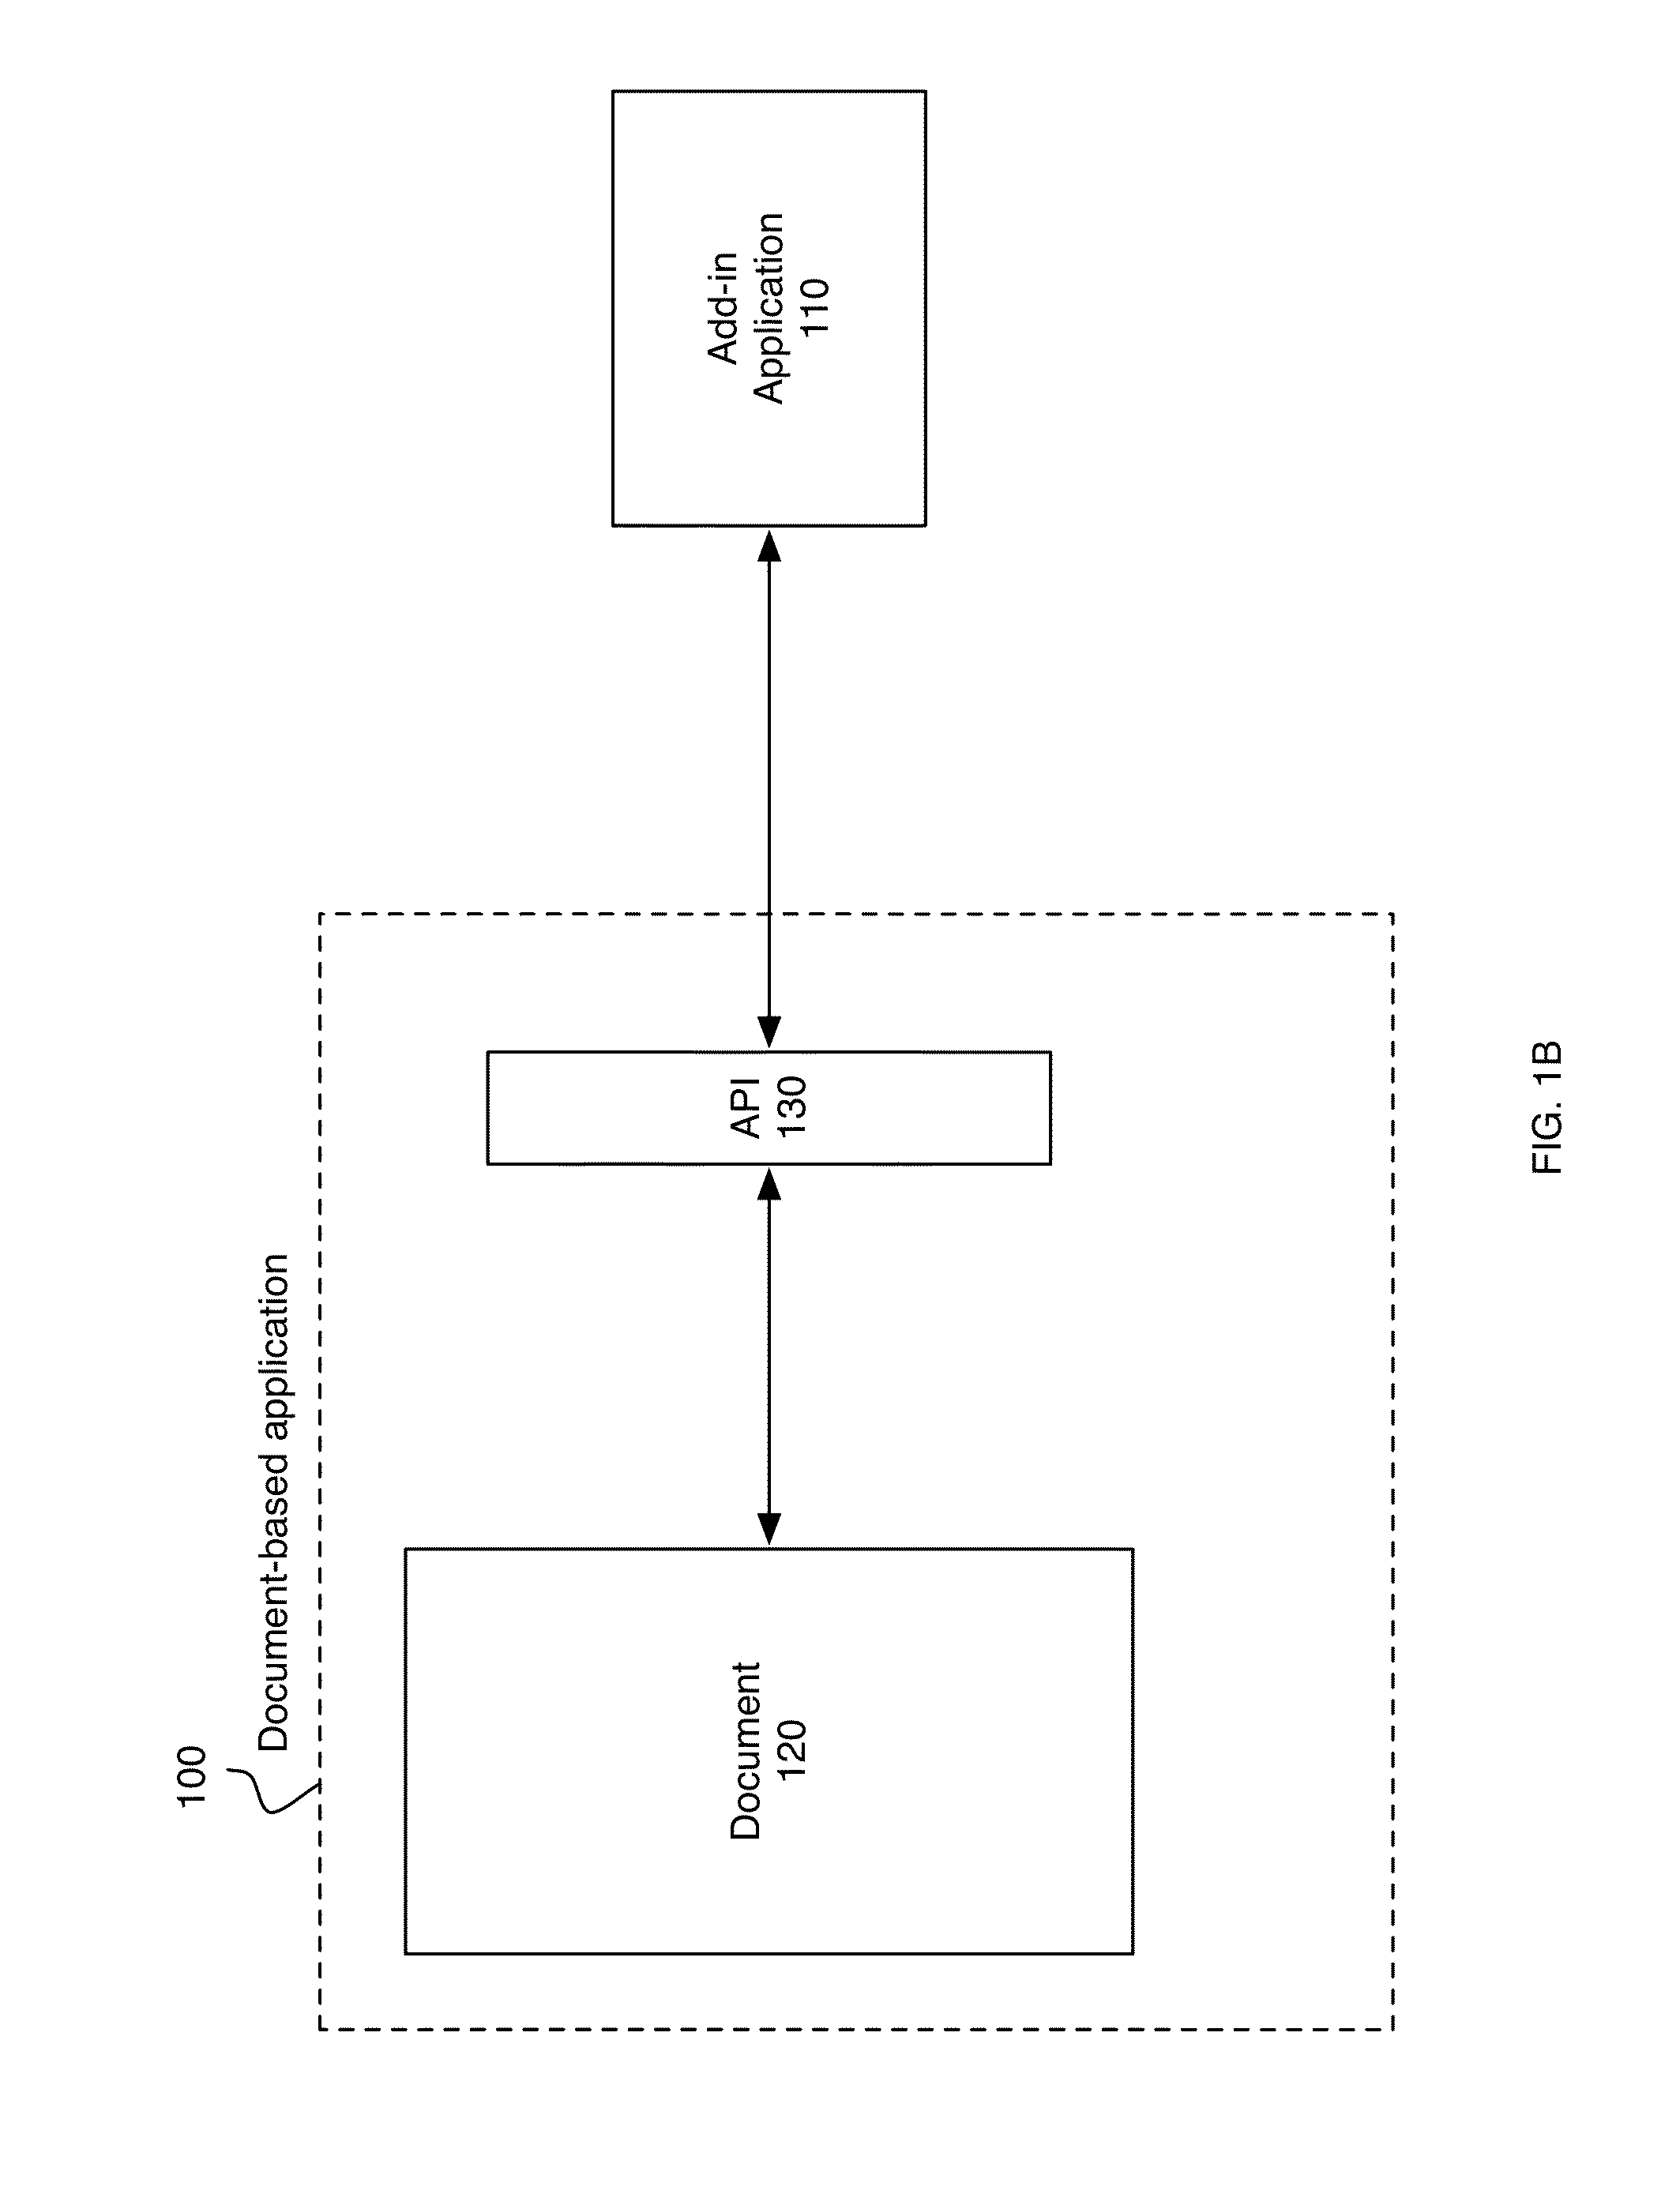 Method and System for Persisting Add-in Data in Documents